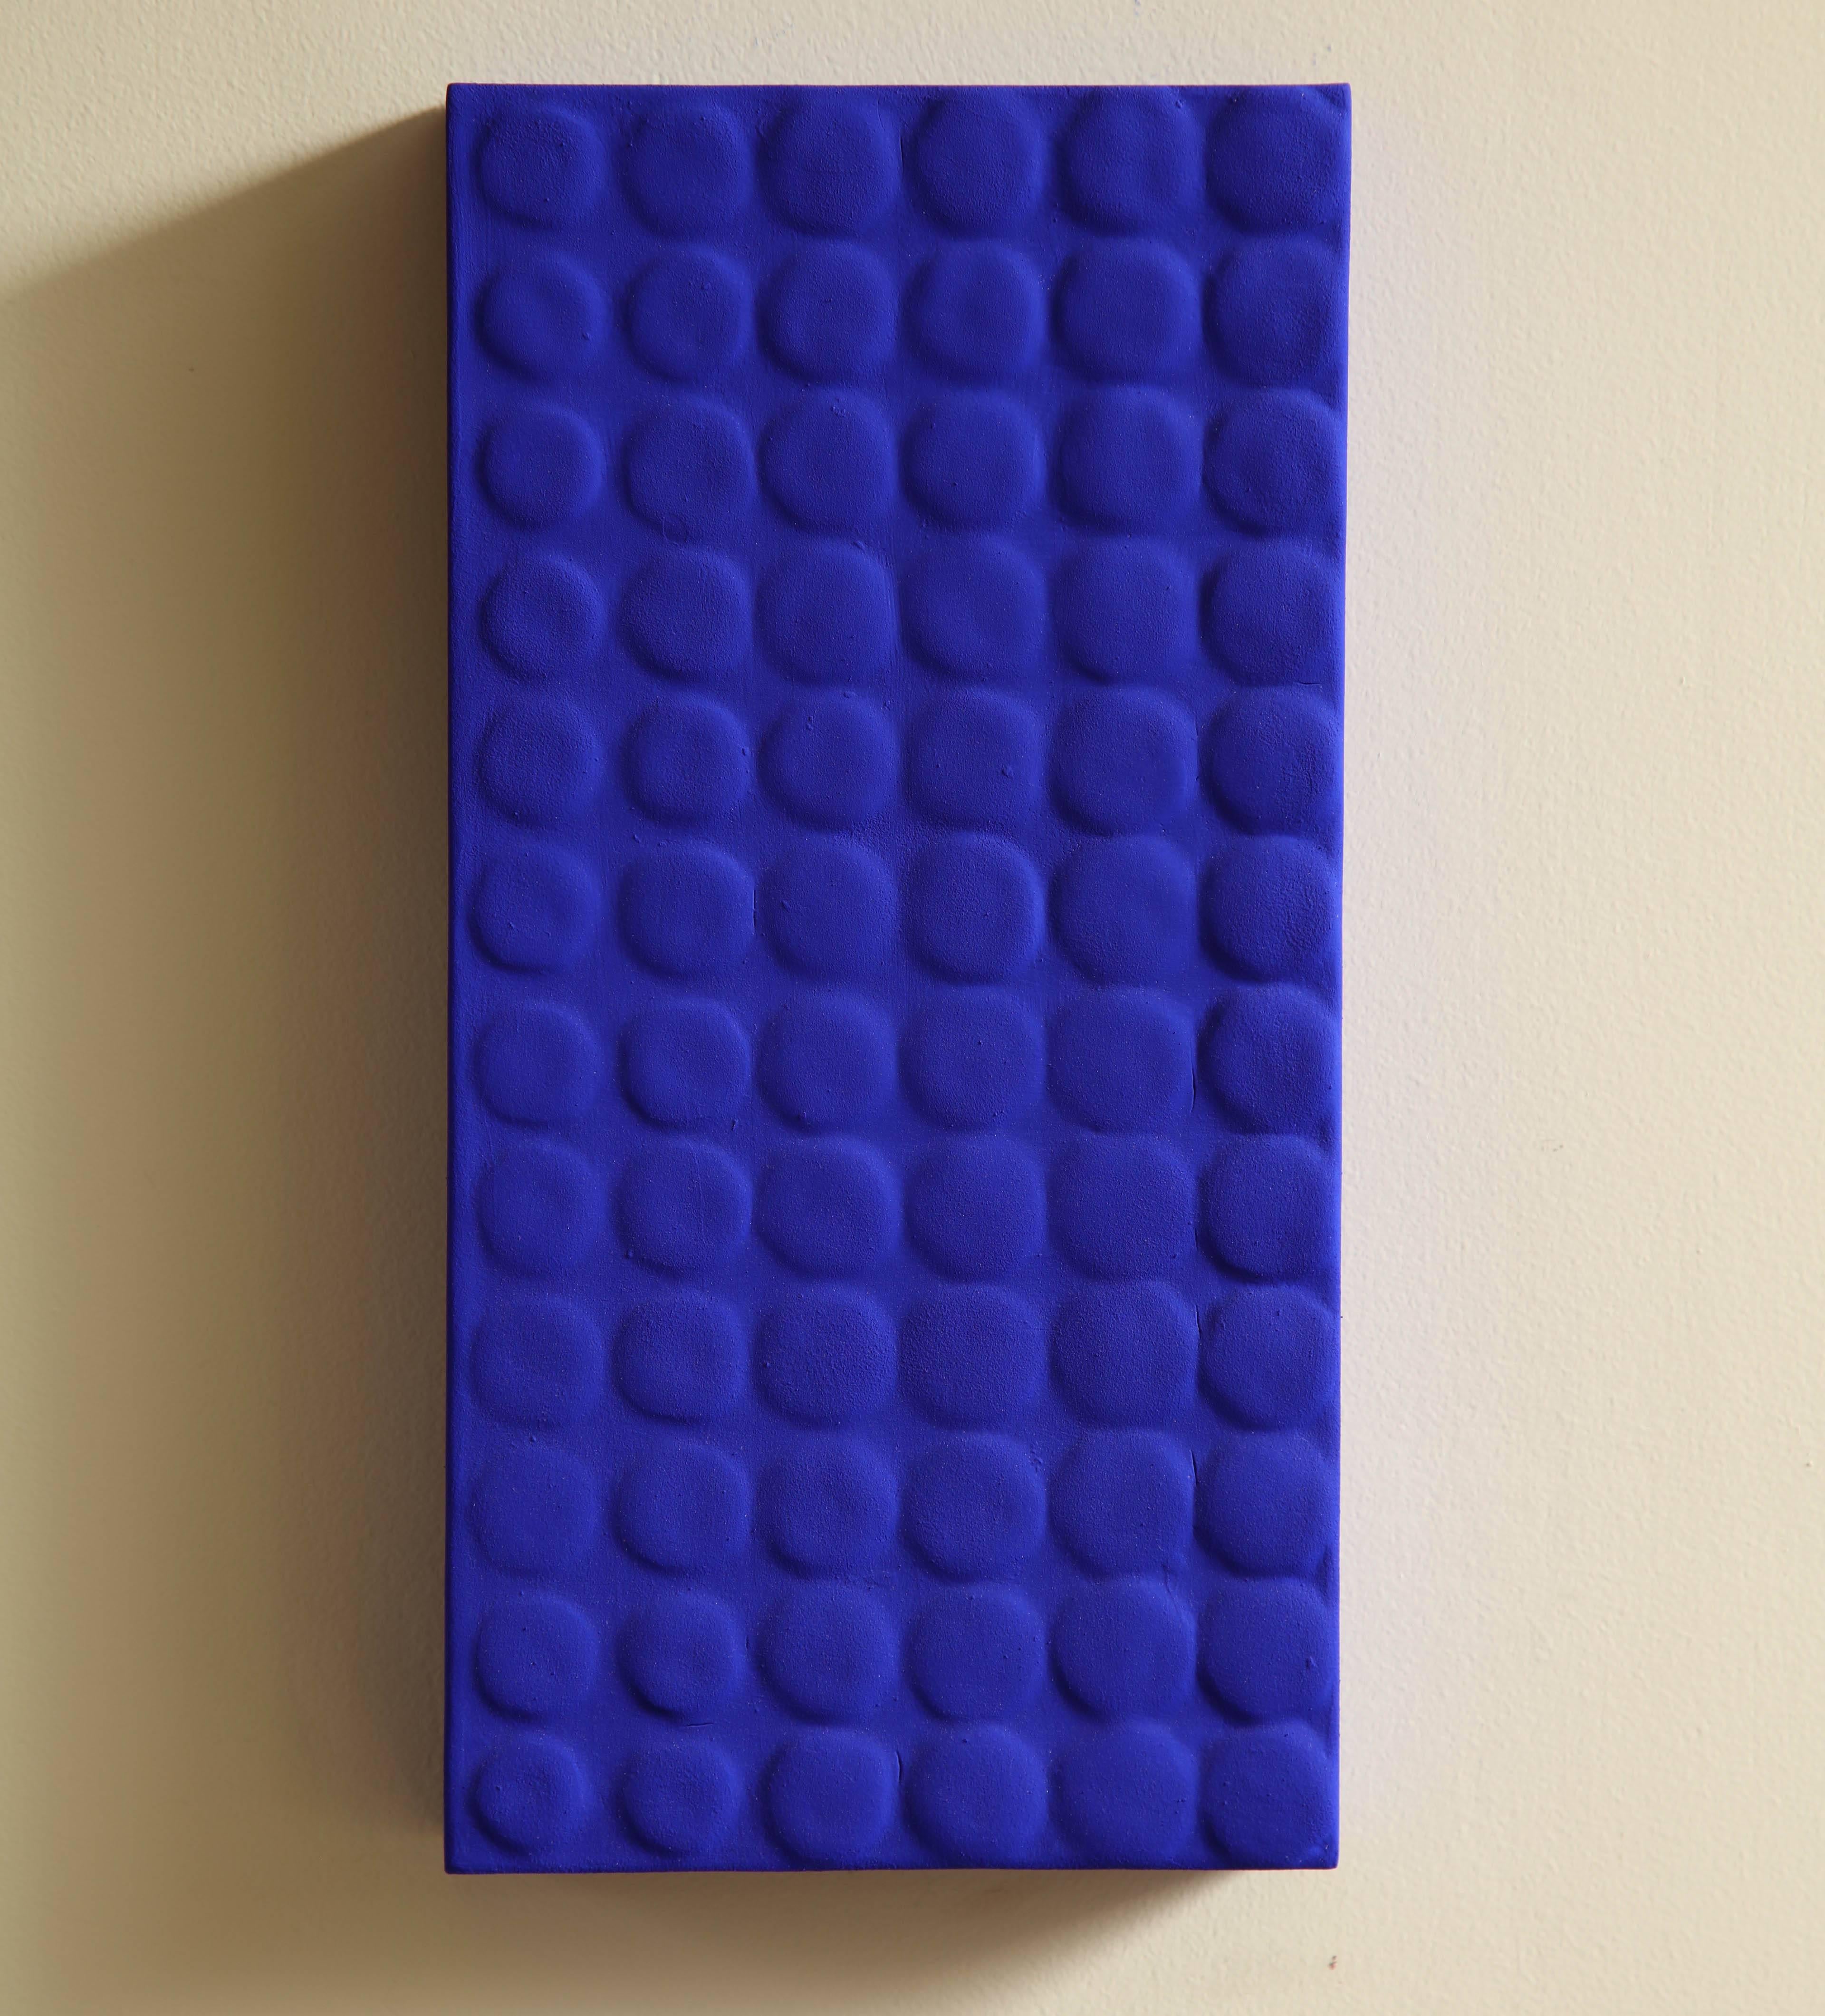 Blue diptych with raised gesso dot motif in the blue pigment Yves Klein made famous by Carol Leskanic.
Title of the piece: Yves Klein Blue
Pieces measures at 12.5